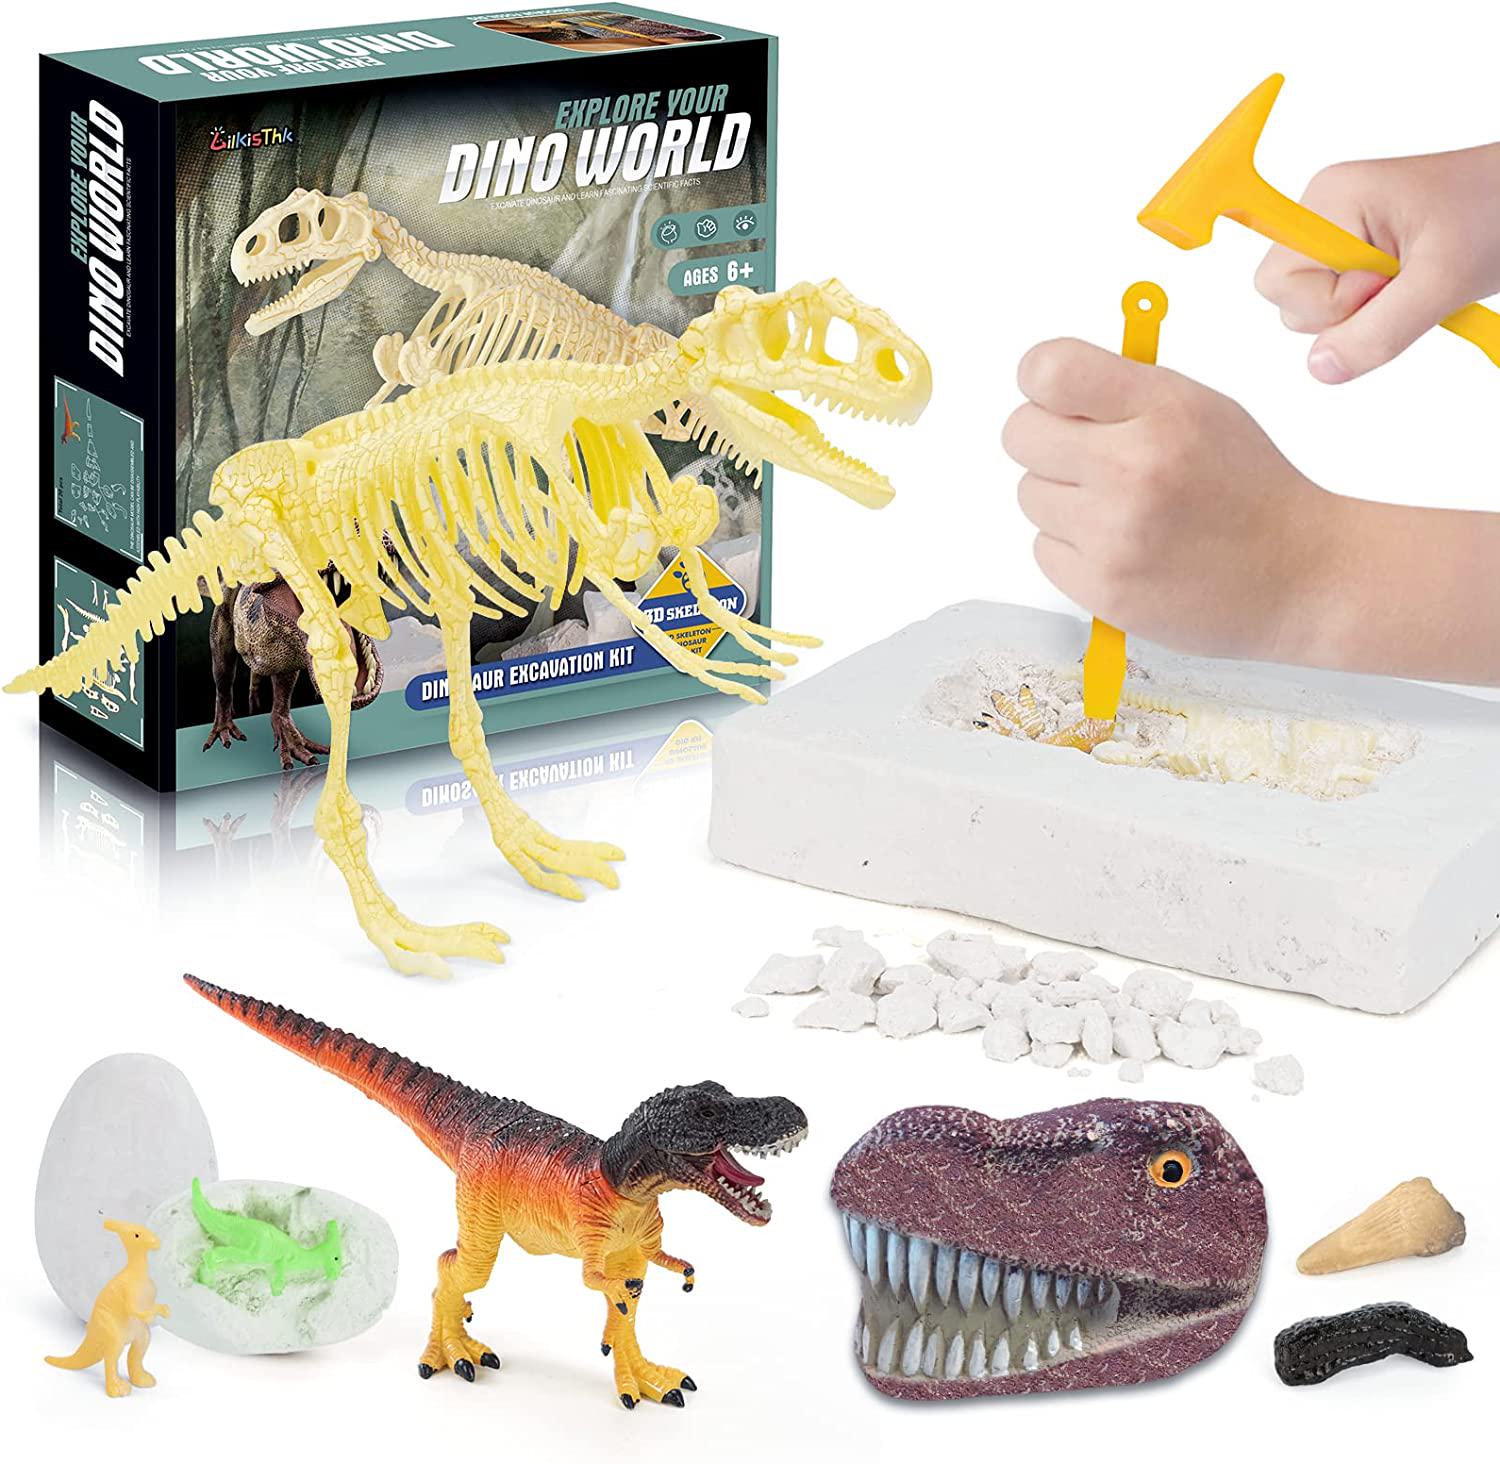 LilKisThk, LilKisThk Dino Dig Kits for Kids, Dinosaur Fossil Excavation Kit with Dino Figures, Dig and Discover Dinosaur Eggs, STEM Toys Science Gifts for Boys and Girls